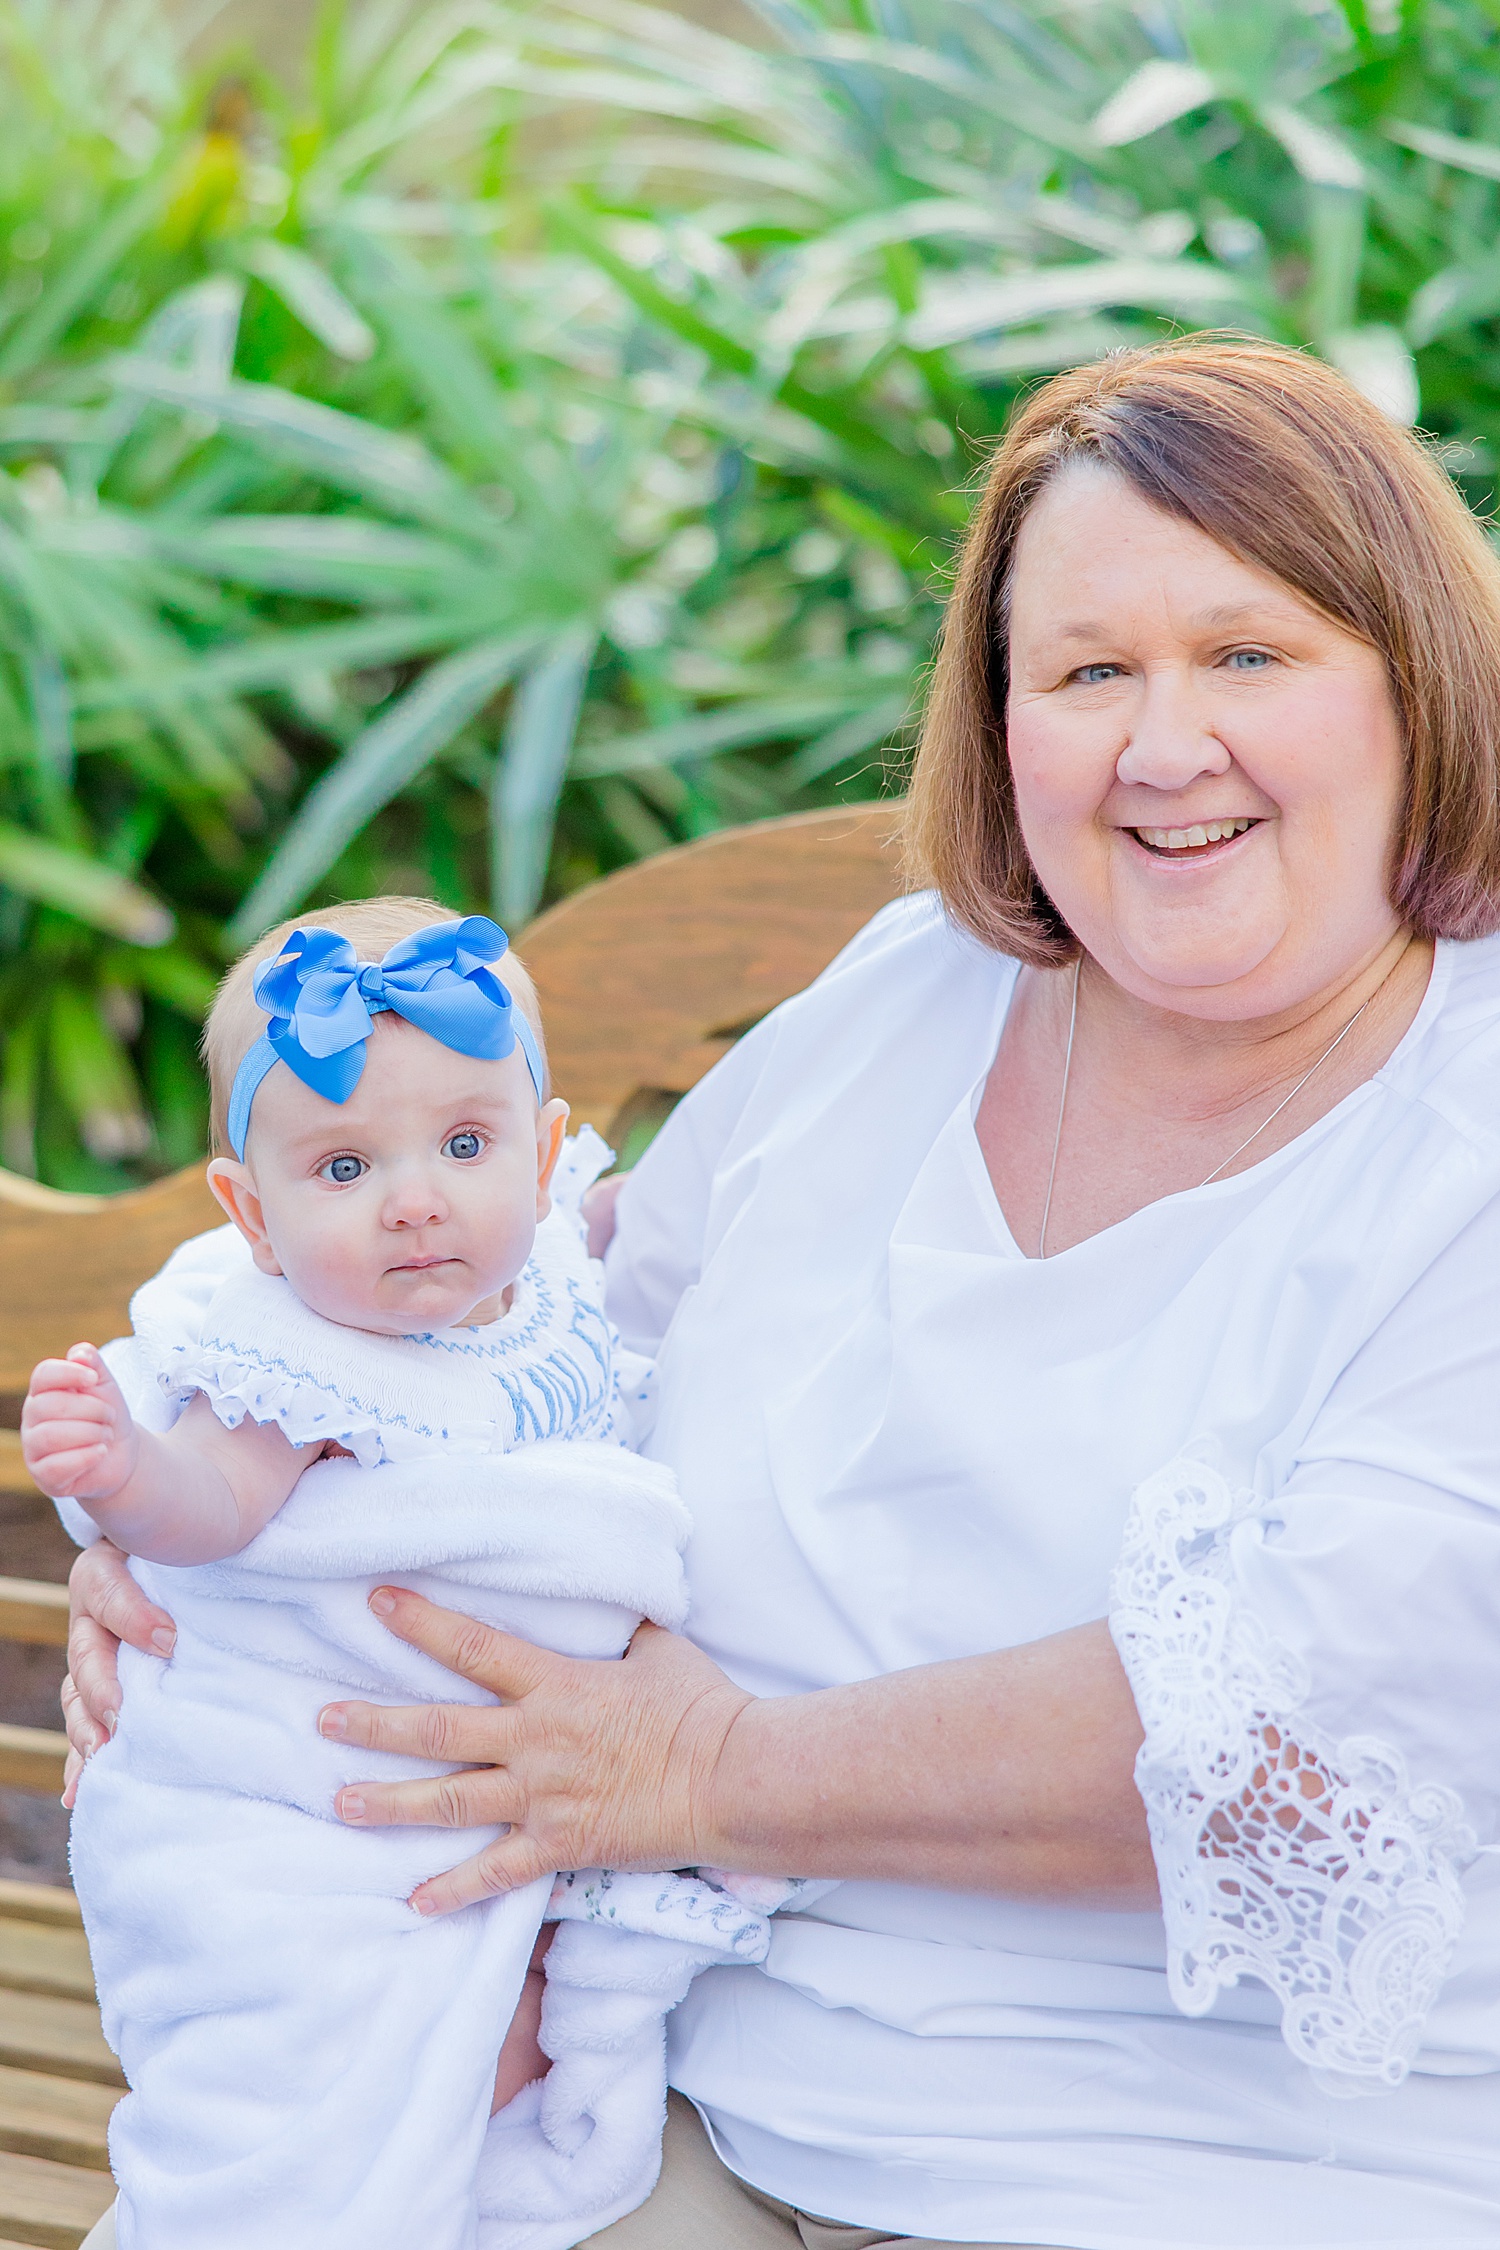 6 month old baby with her grandma during milestone portraits